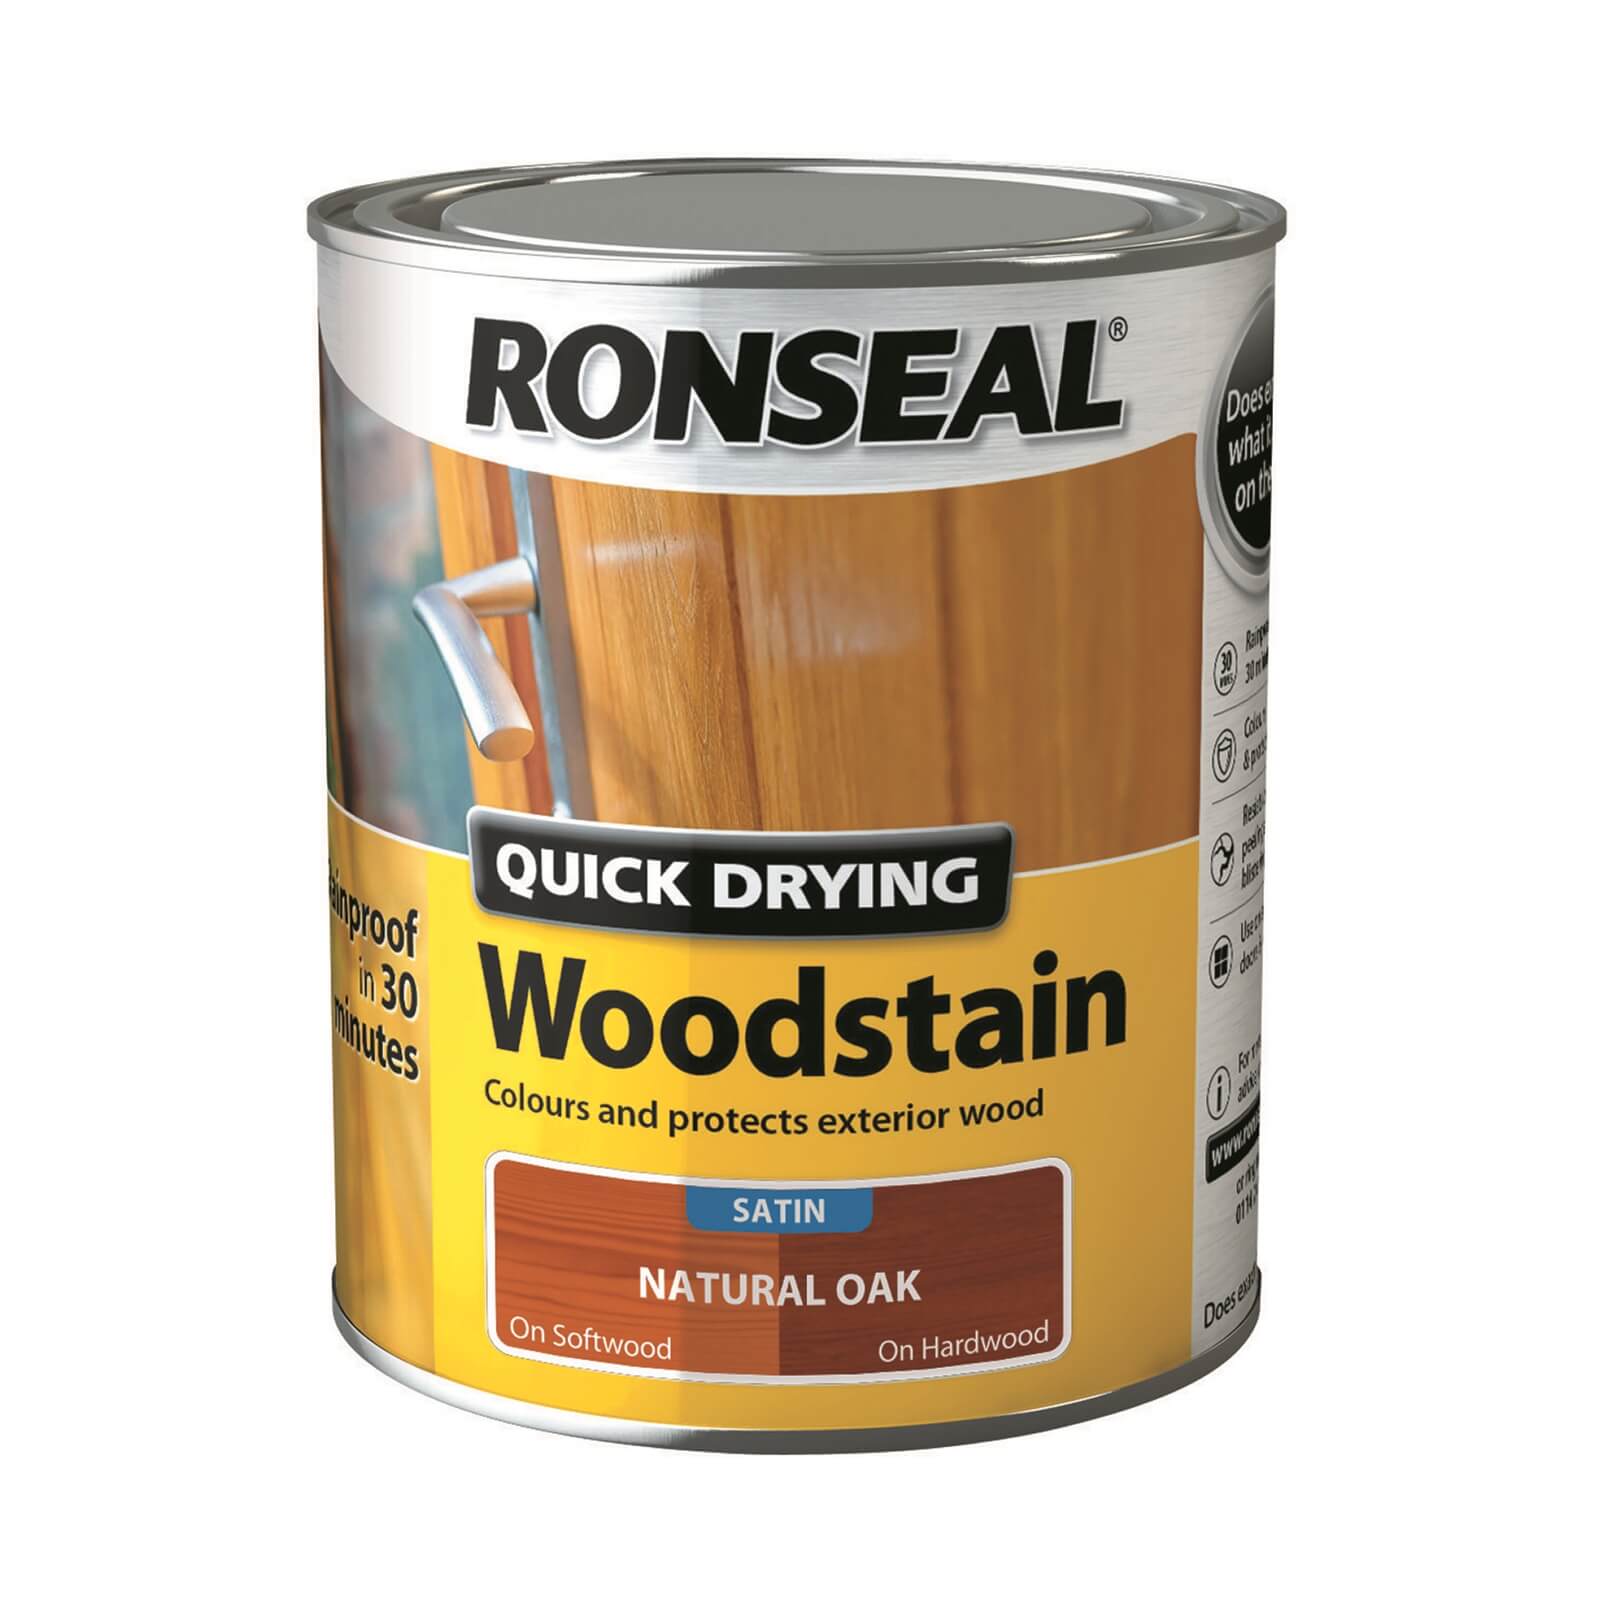 Ronseal Quick Drying Woodstain - Natural Oak Satin 750ml